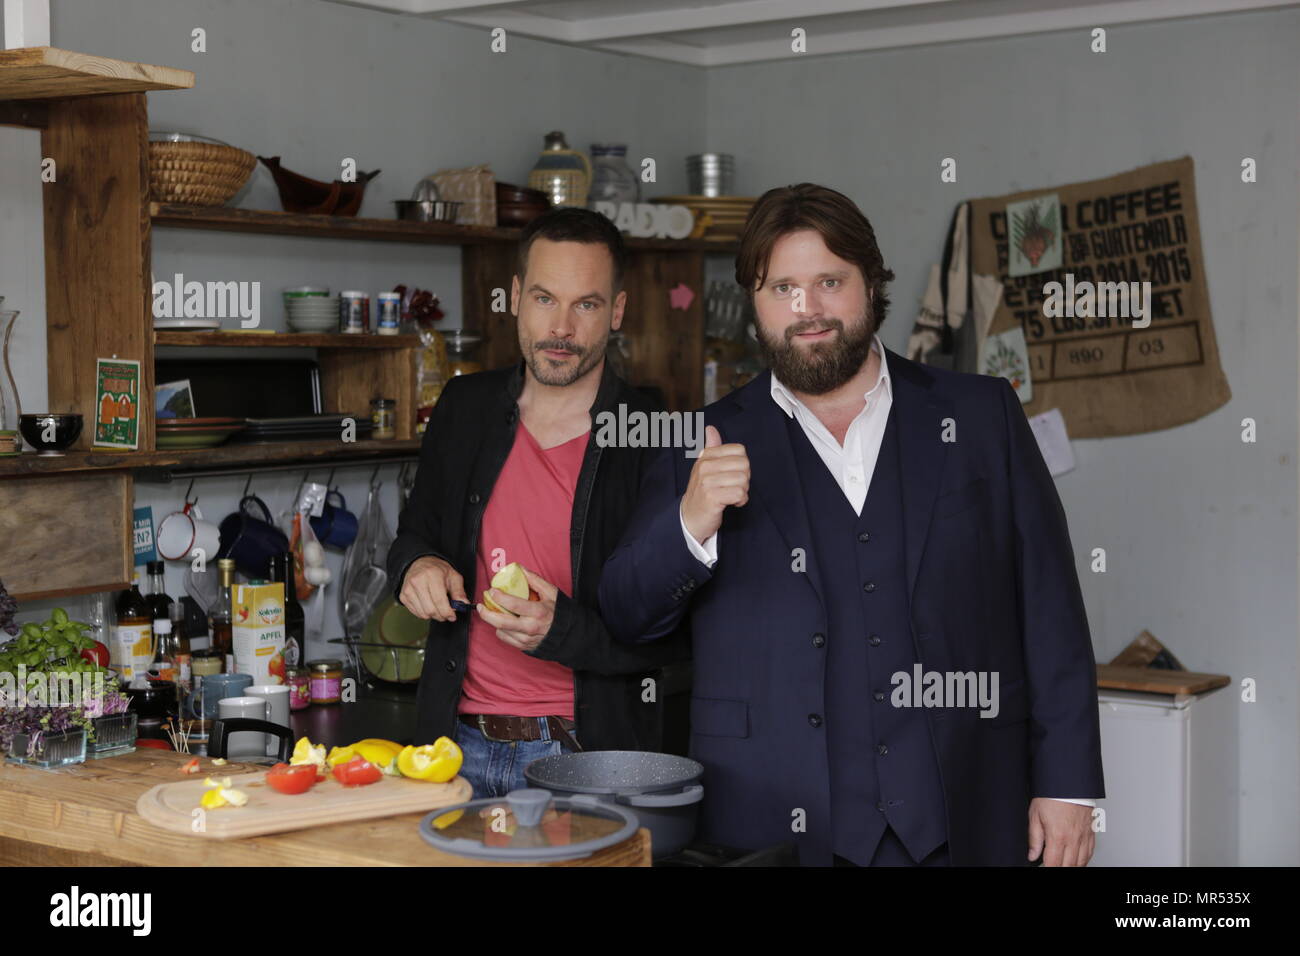 Actors Wanja Mues (left) an (Antoine Monot, Jr. (right) pose in the kitchen of  the houseboat that is owned by Mues' character Leo in the TV show preparing food. 4 new episodes of the relaunch of the long running TV series 'Ein Fall fuer zwei’ (A case for two) are being filmed in Frankfurt for the German state TV broadcaster ZDF (Zweites Deutsches Fernsehen). It stars Antoine Monot, Jr. as defence attorney Benjamin ‘Benni’ Hornberg and Wanja Mues as private investigator Leo Oswald. The episodes are directed by Thomas Nennstiel. The episodes are set to air in October. (Photo by Michael Debets / Stock Photo